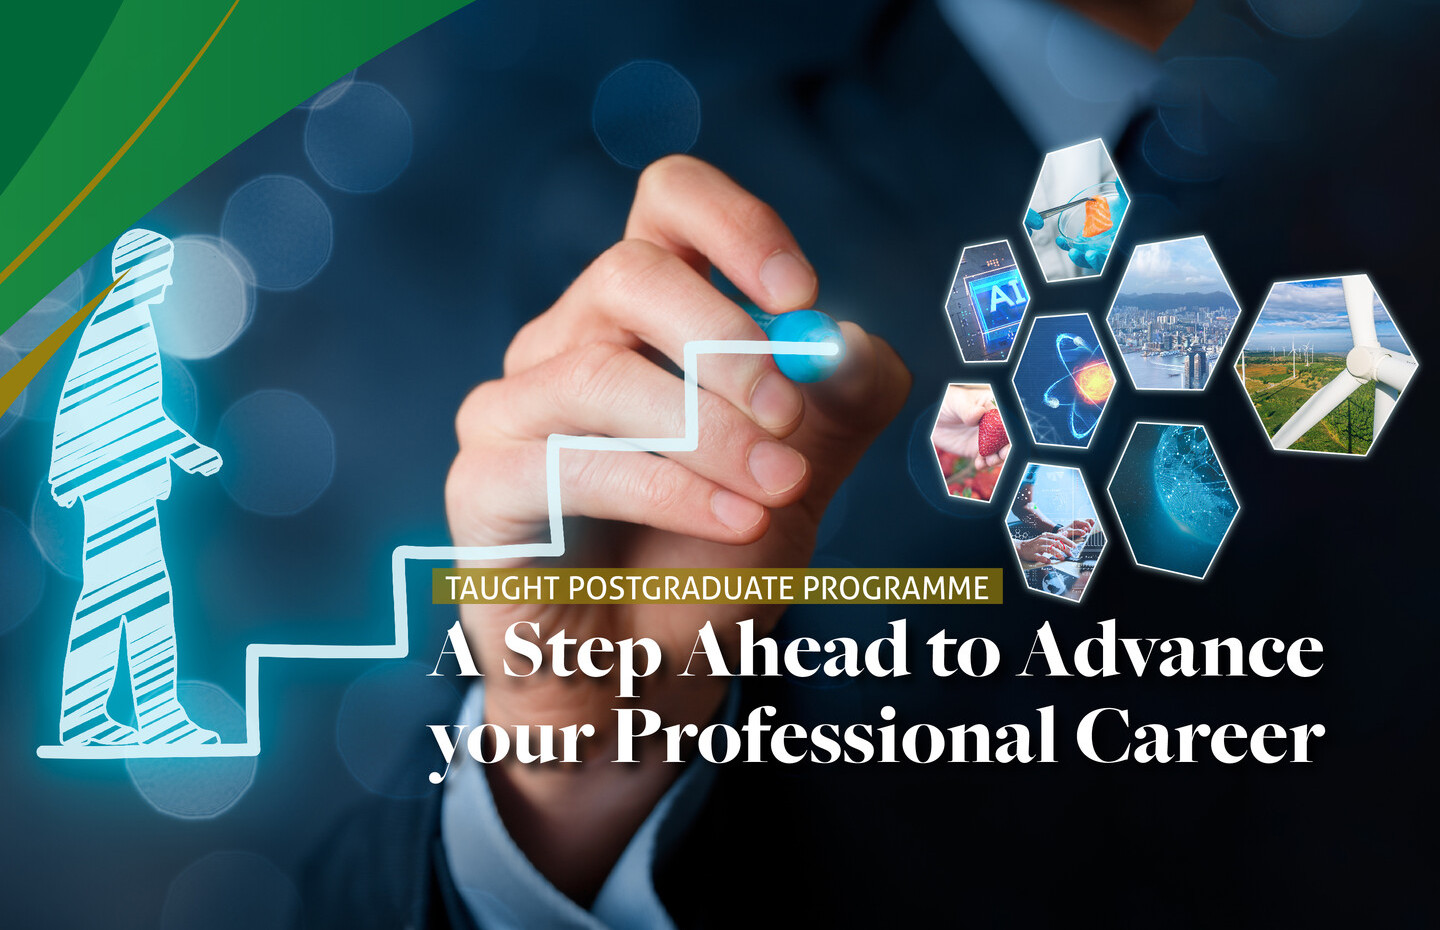 Taught Postgraduate Programme - A Step Ahead to Advance your Professional Career